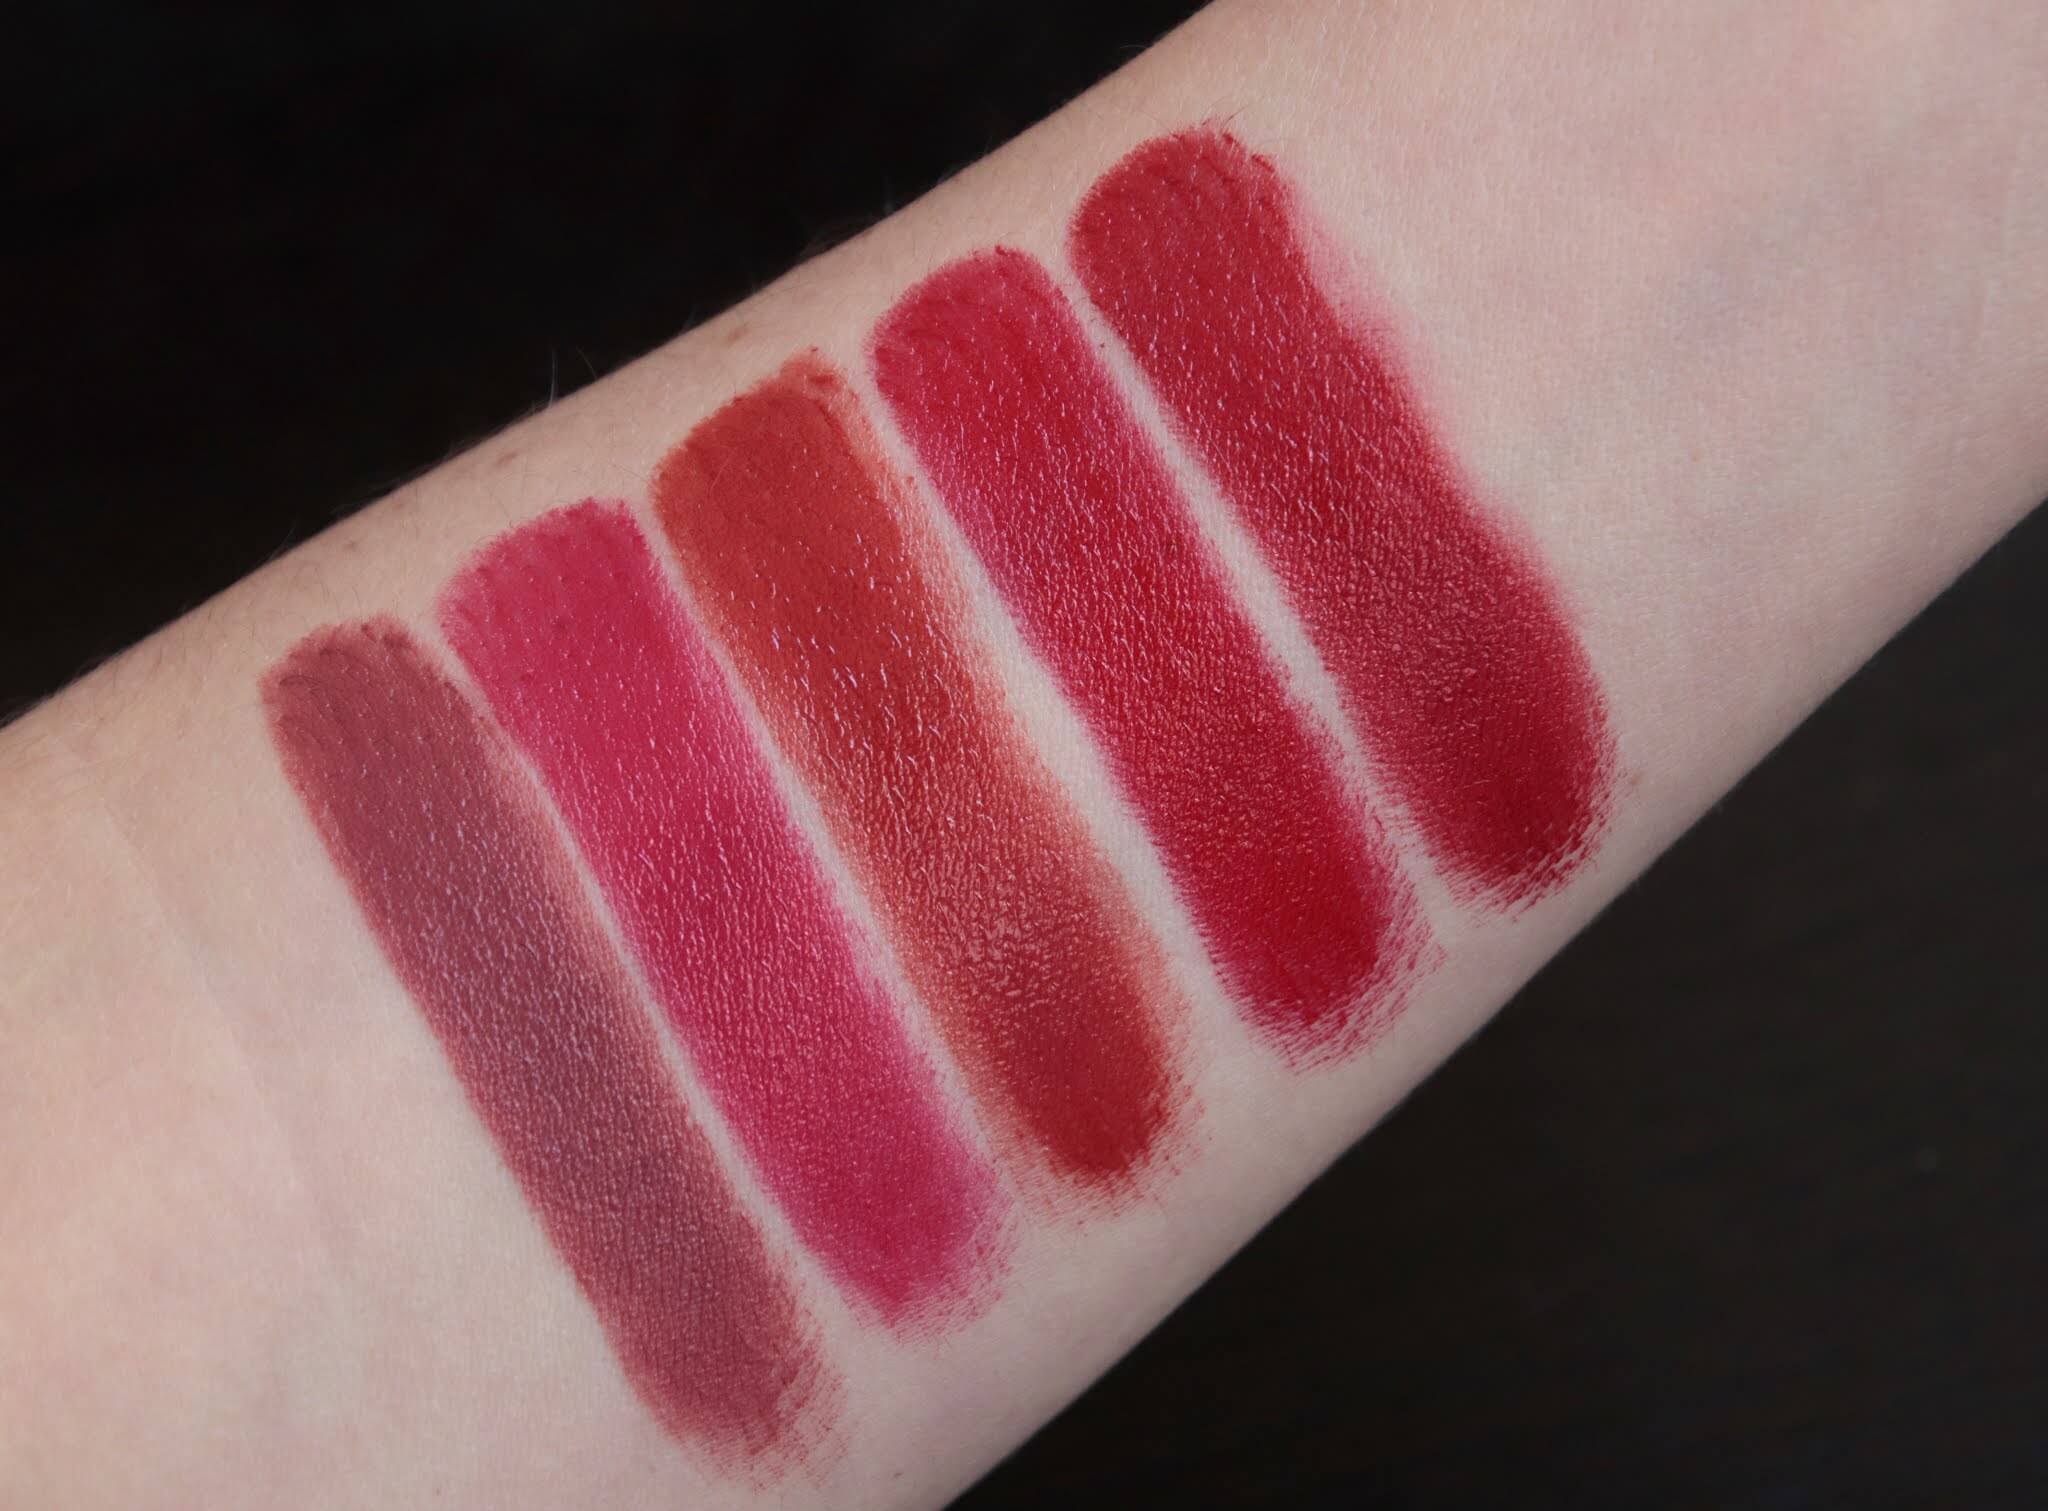 Chanel Alive (140) Rouge Coco Bloom Lip Colour Review & Swatches